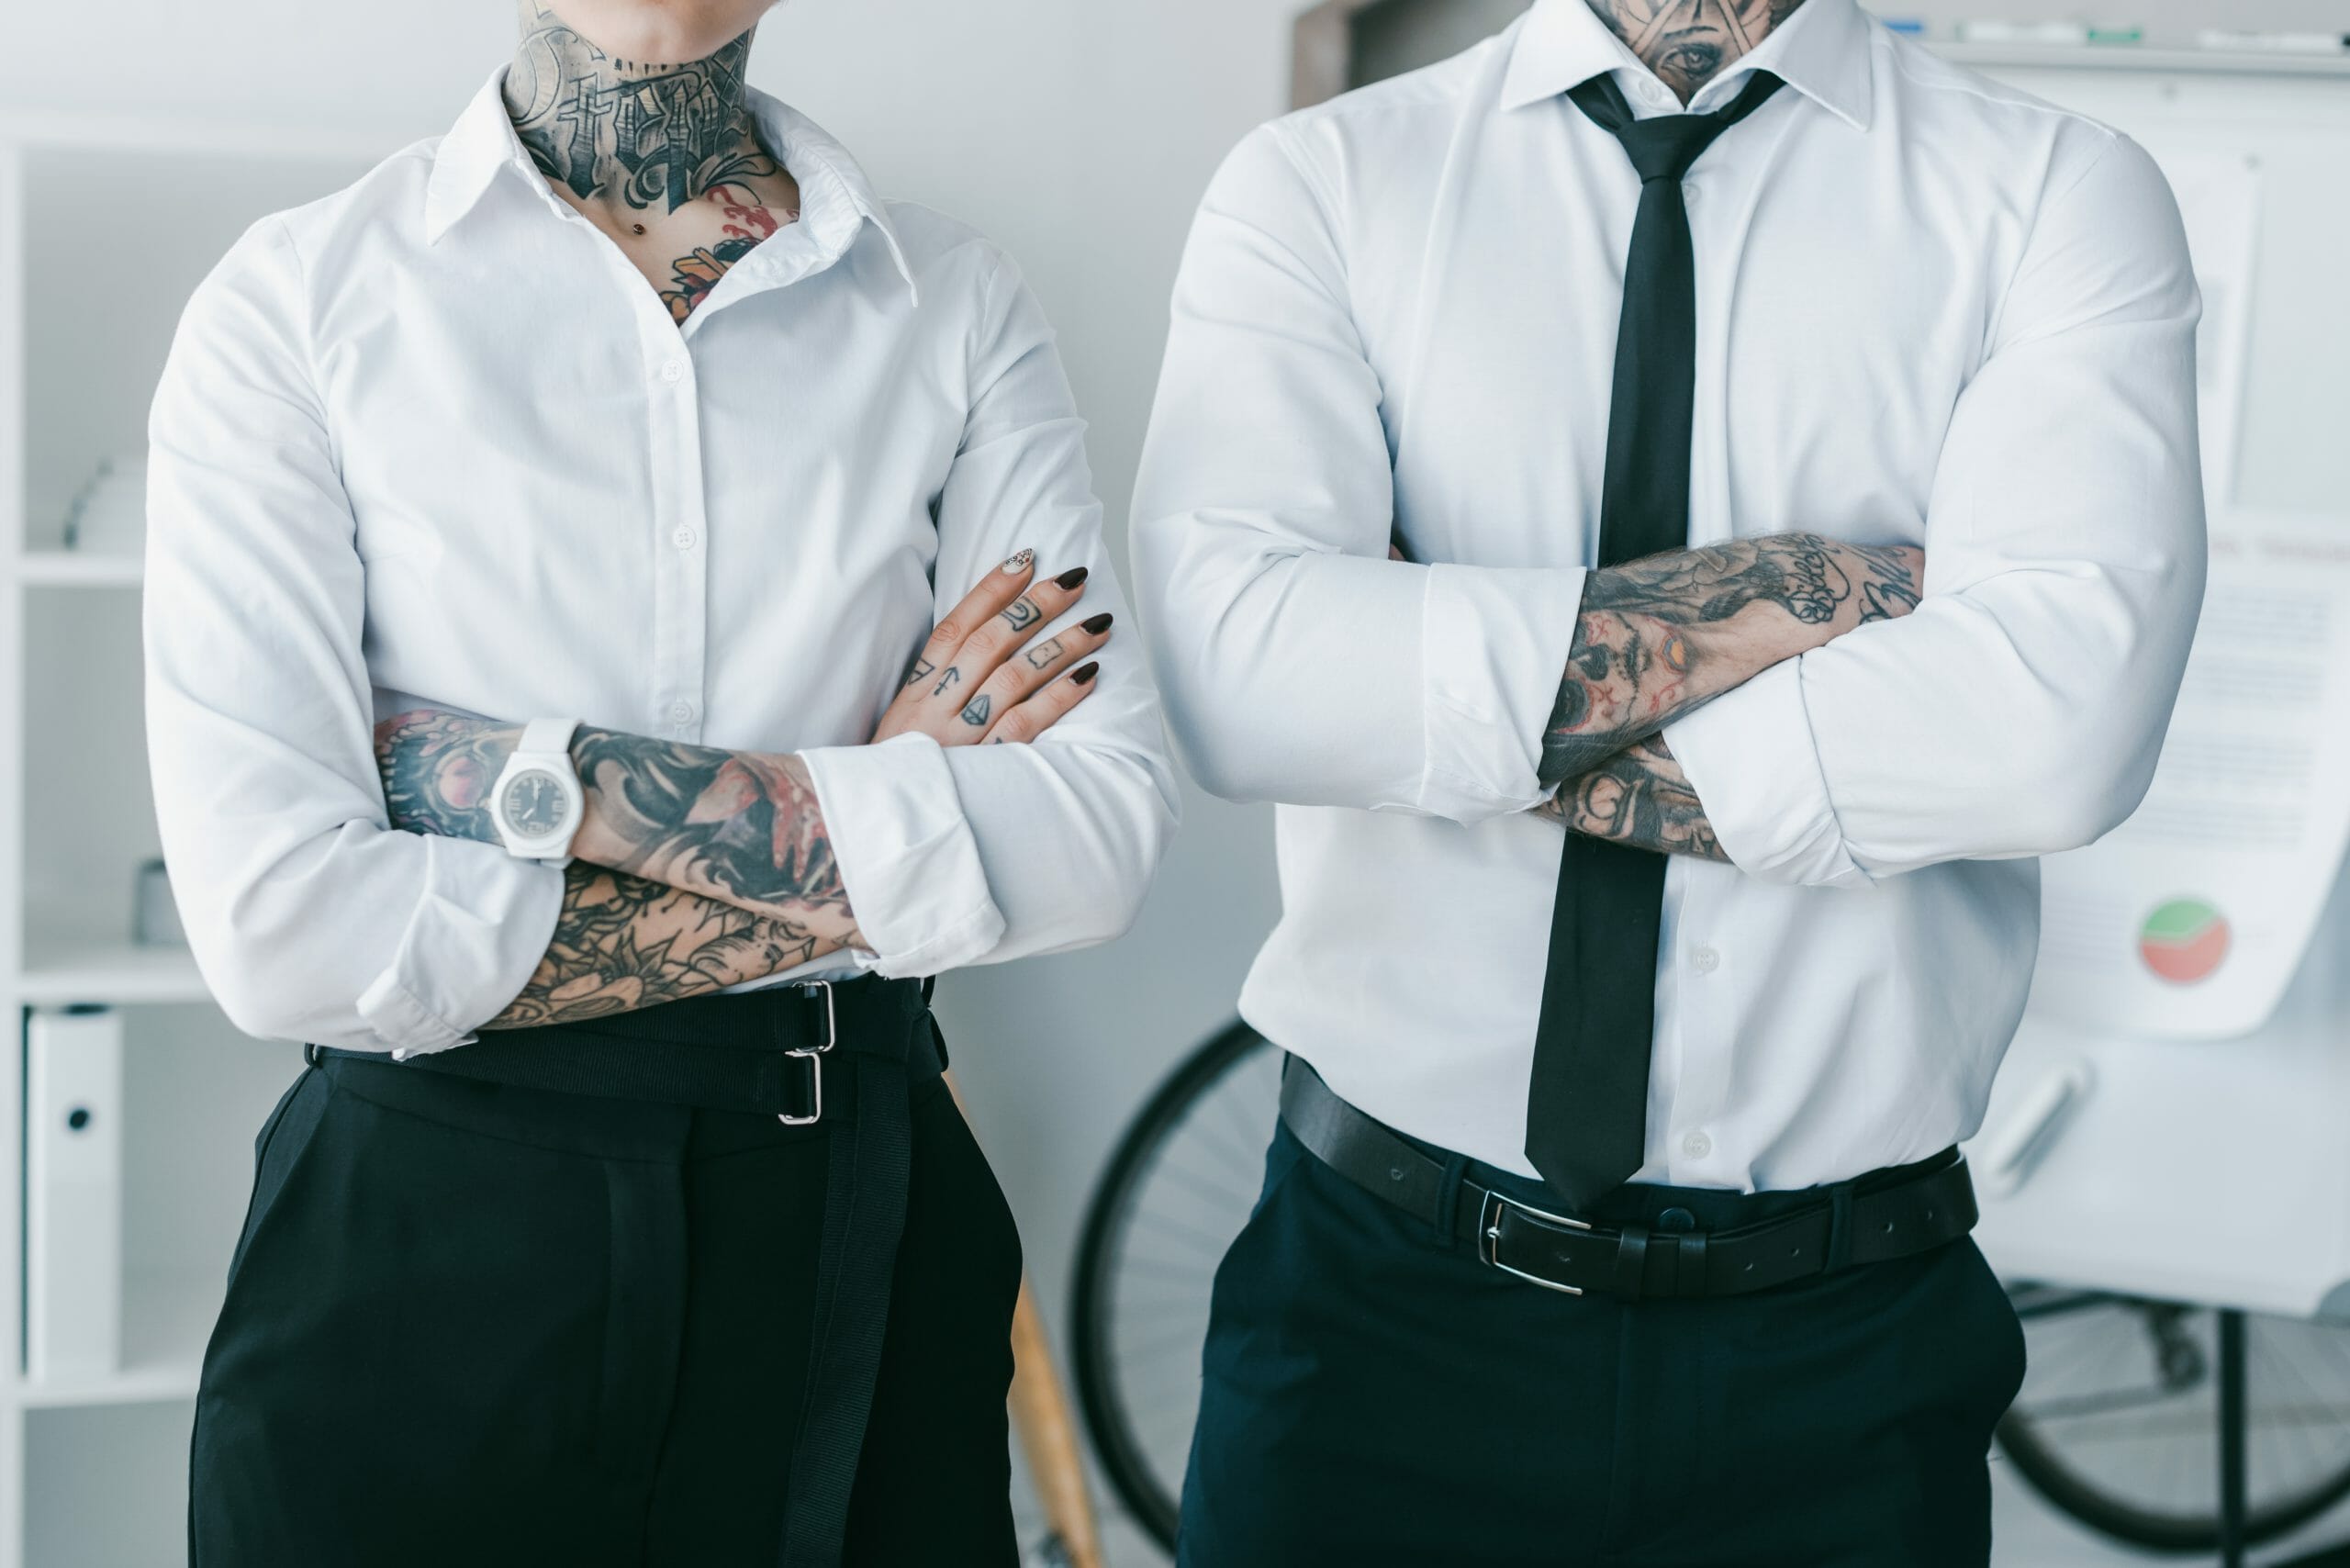 Tattooed man and woman wearing professional attire at work